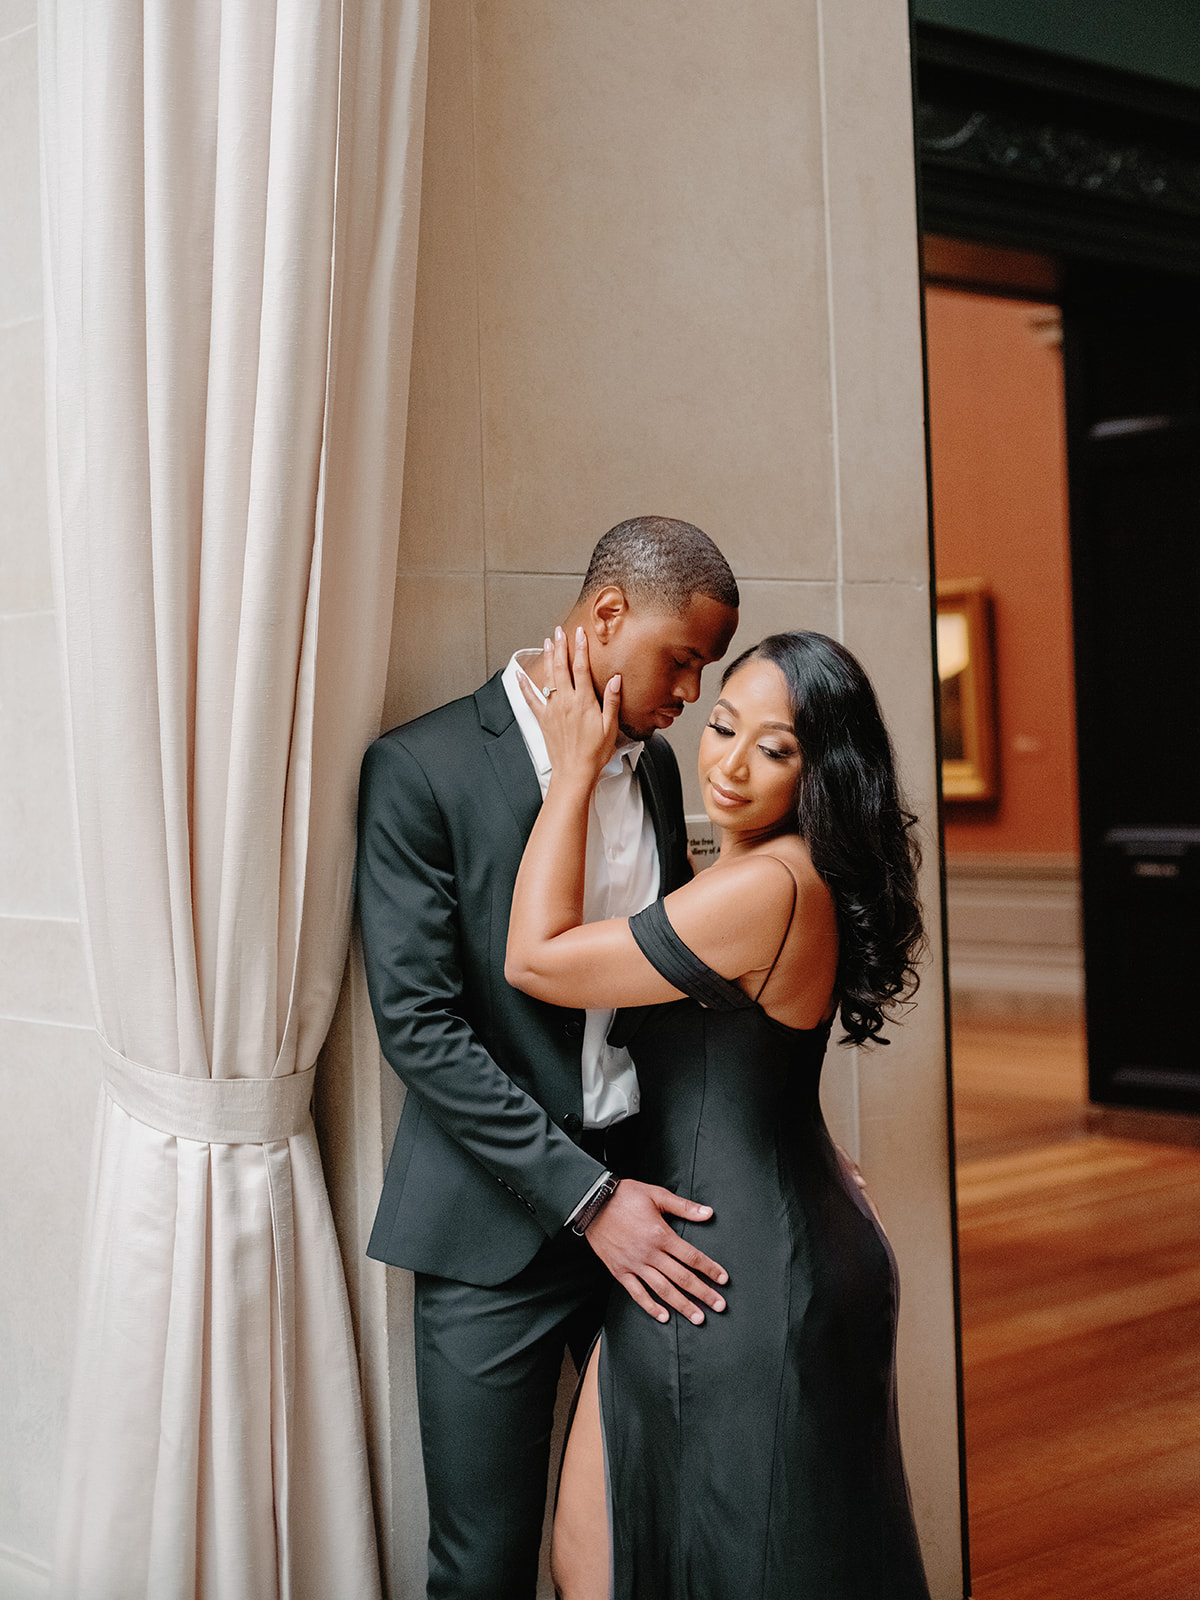 “Art isn’t paint, it’s love”: Stylish Engagement Session at The National Gallery of Art in Washington D.C.